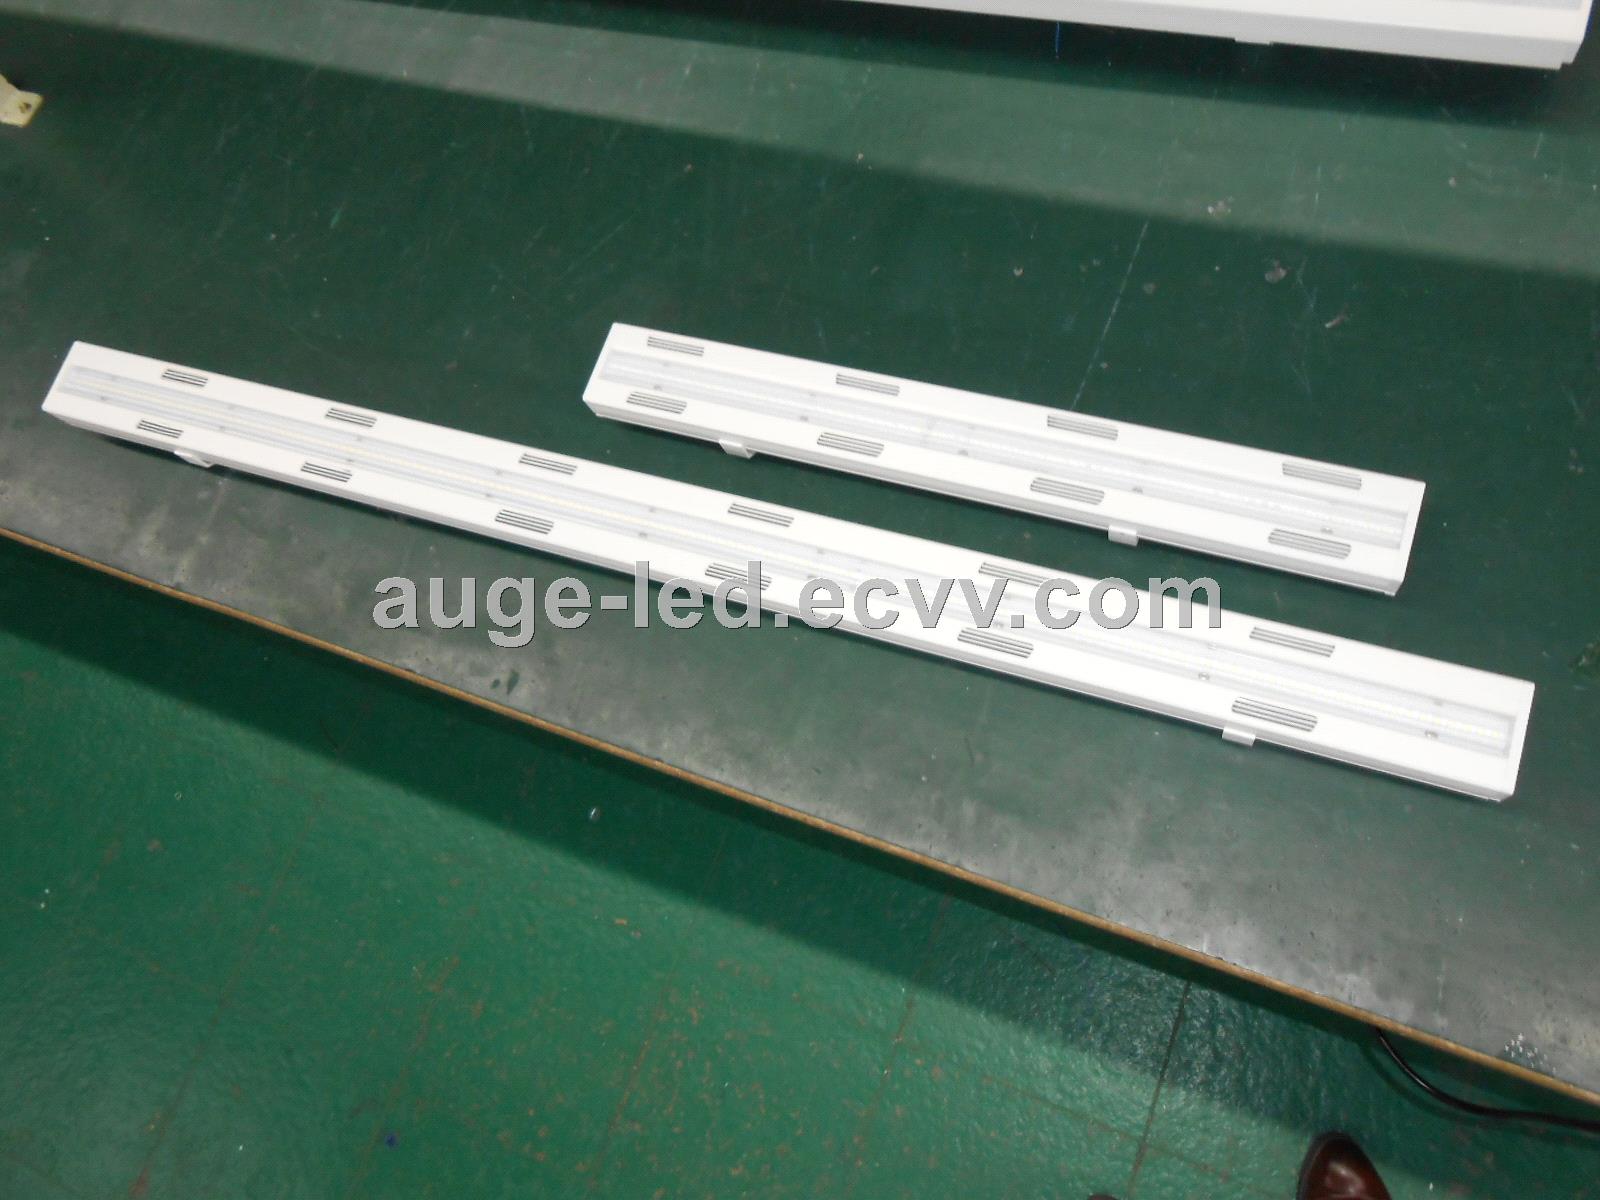 600mm 50W led linear high bay light 06m linear industrial lighting for warehouse 010V dimming line trunking system